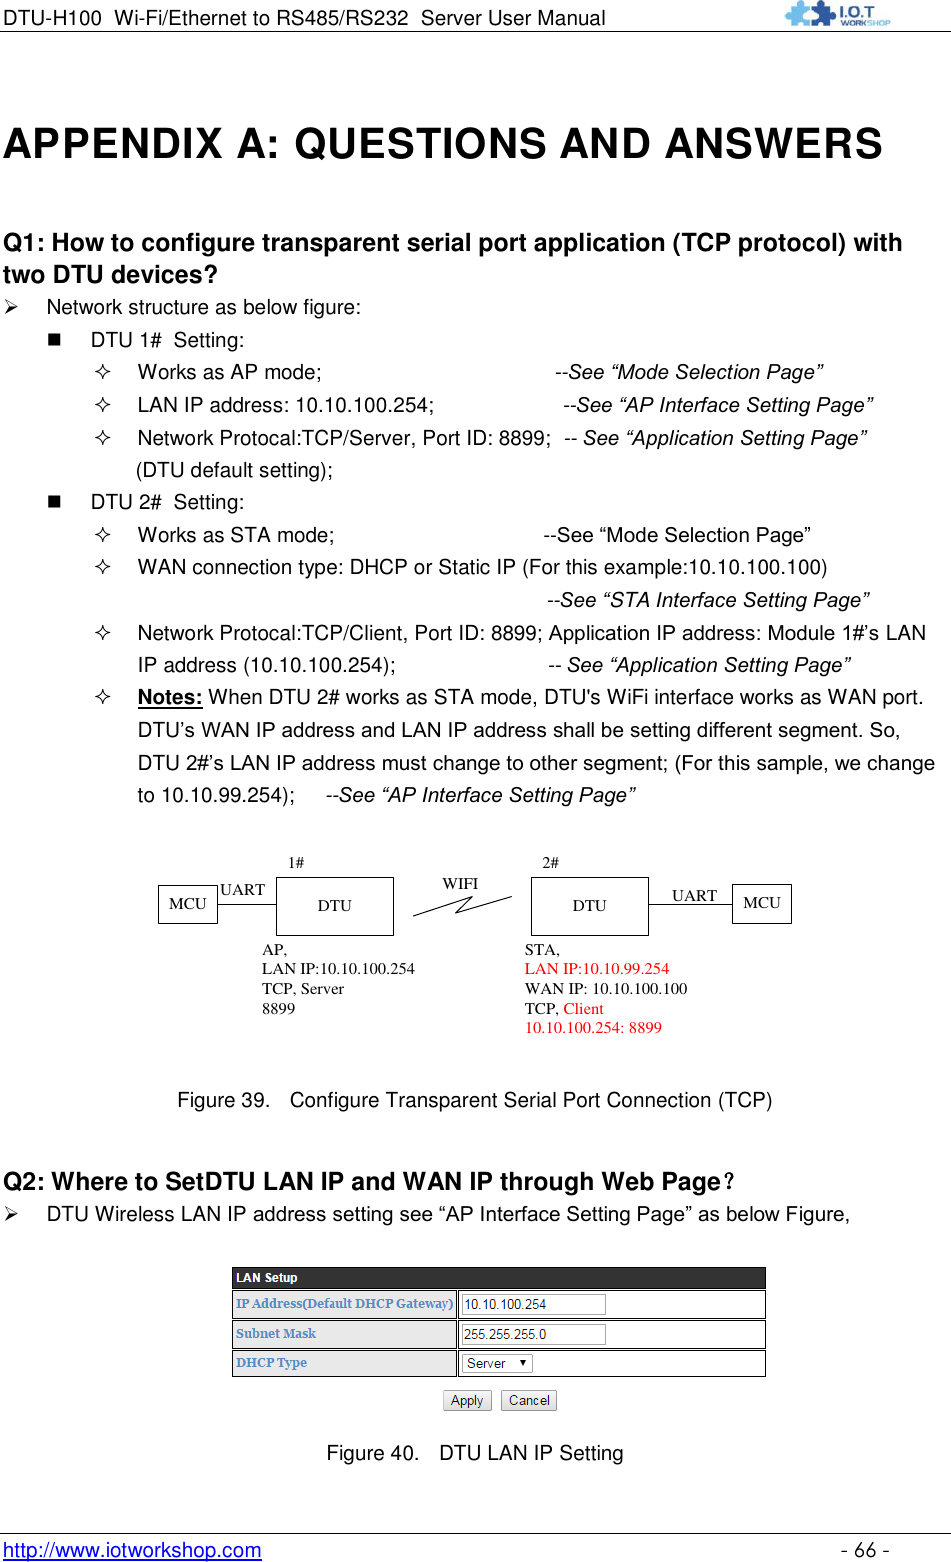 DTU-H100 Wi-Fi/Ethernet to RS485/RS232  Server User Manual    http://www.iotworkshop.com    - 66 - APPENDIX A: QUESTIONS AND ANSWERS Q1: How to configure transparent serial port application (TCP protocol) with two DTU devices?  Network structure as below figure:  DTU 1#  Setting:  Works as AP mode;                                        --See “Mode Selection Page”  LAN IP address: 10.10.100.254;                      --See “AP Interface Setting Page”   Network Protocal:TCP/Server, Port ID: 8899;  -- See “Application Setting Page”  (DTU default setting);  DTU 2#  Setting:  Works as STA mode;                                    --See “Mode Selection Page”  WAN connection type: DHCP or Static IP (For this example:10.10.100.100)                                                                               --See “STA Interface Setting Page”                                                                Network Protocal:TCP/Client, Port ID: 8899; Application IP address: Module 1#‟s LAN IP address (10.10.100.254);                          -- See “Application Setting Page”  Notes: When DTU 2# works as STA mode, DTU&apos;s WiFi interface works as WAN port. DTU‟s WAN IP address and LAN IP address shall be setting different segment. So, DTU 2#‟s LAN IP address must change to other segment; (For this sample, we change to 10.10.99.254);     --See “AP Interface Setting Page” DTUAP, LAN IP:10.10.100.254TCP, Server8899DTUSTA, LAN IP:10.10.99.254WAN IP: 10.10.100.100TCP, Client10.10.100.254: 88991# 2#WIFI MCUMCU UARTUART Figure 39. Configure Transparent Serial Port Connection (TCP) Q2: Where to SetDTU LAN IP and WAN IP through Web Page？  DTU Wireless LAN IP address setting see “AP Interface Setting Page” as below Figure,  Figure 40. DTU LAN IP Setting 